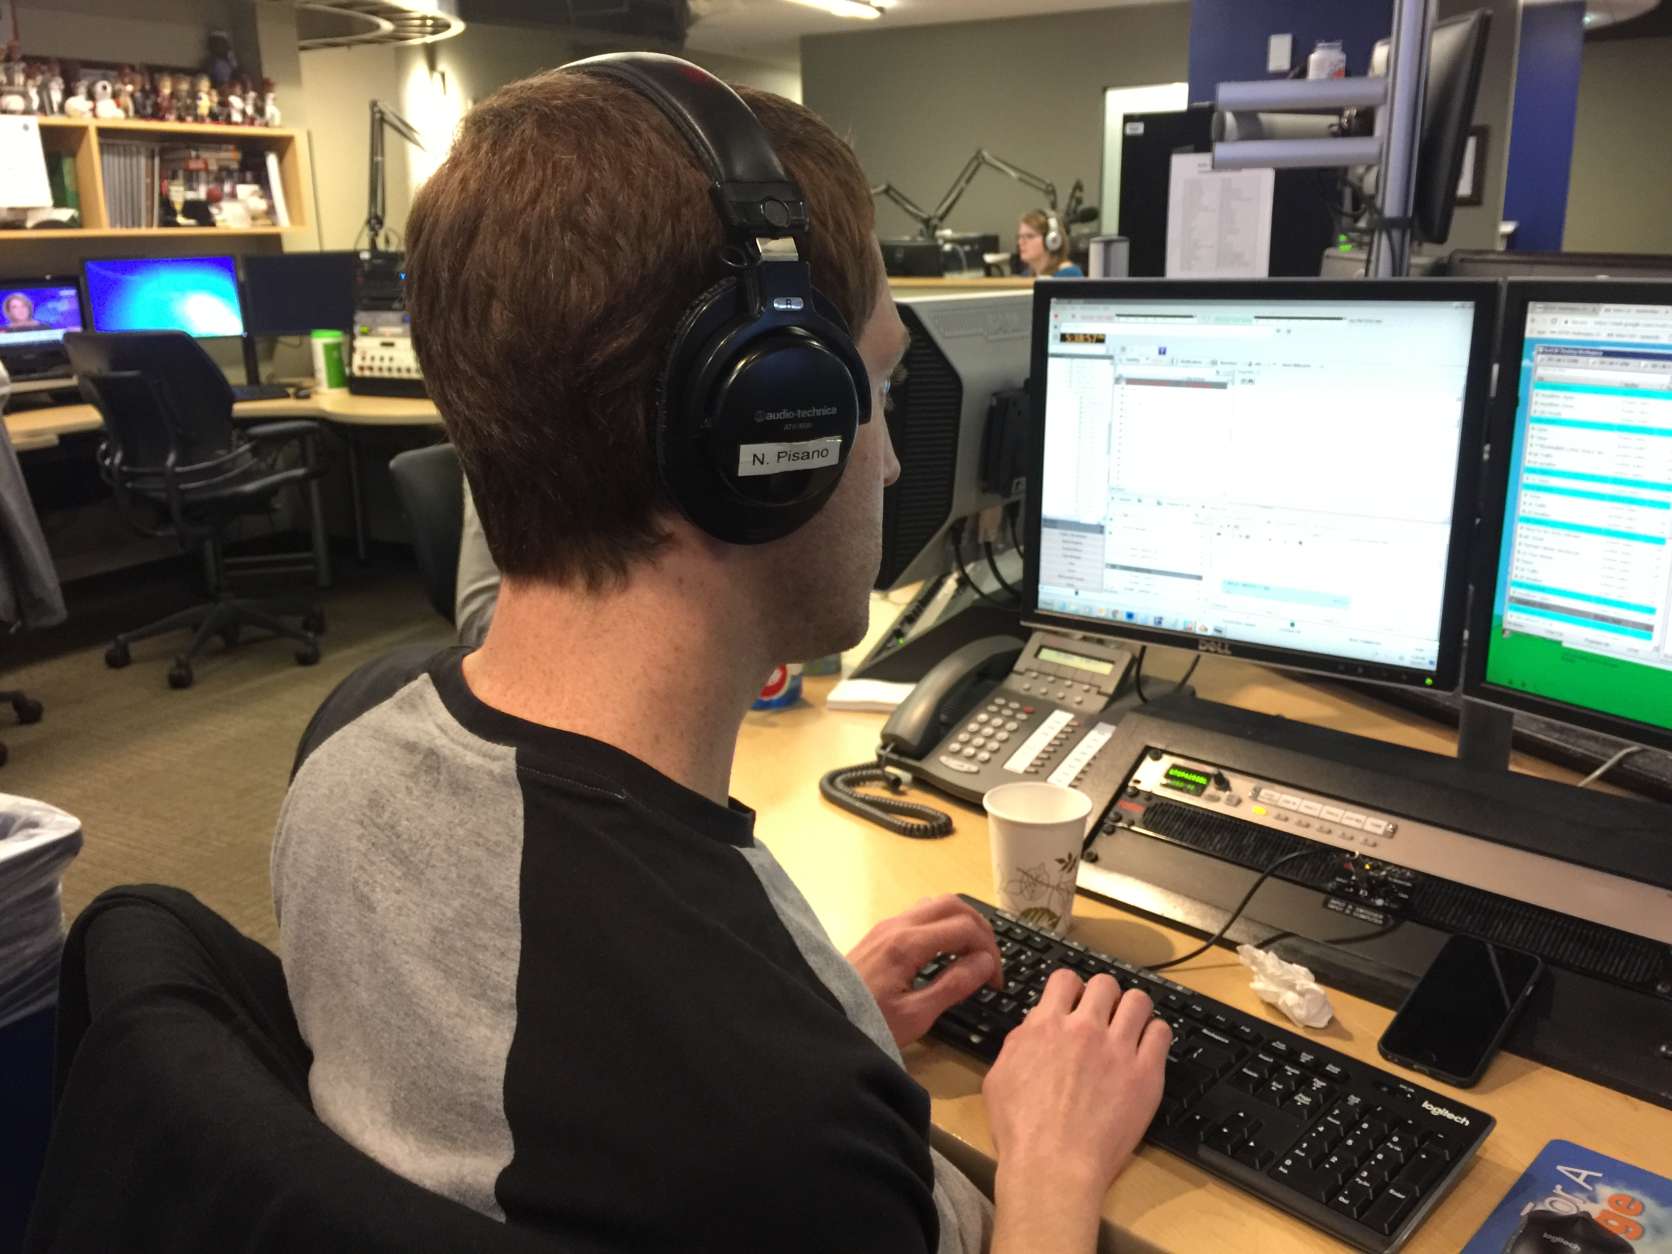 Headphones typically come with information on how loud they can get. If no "decibel" data is available, it is recommended to not go louder than half of the maximum volume. (WTOP/Kristi King)